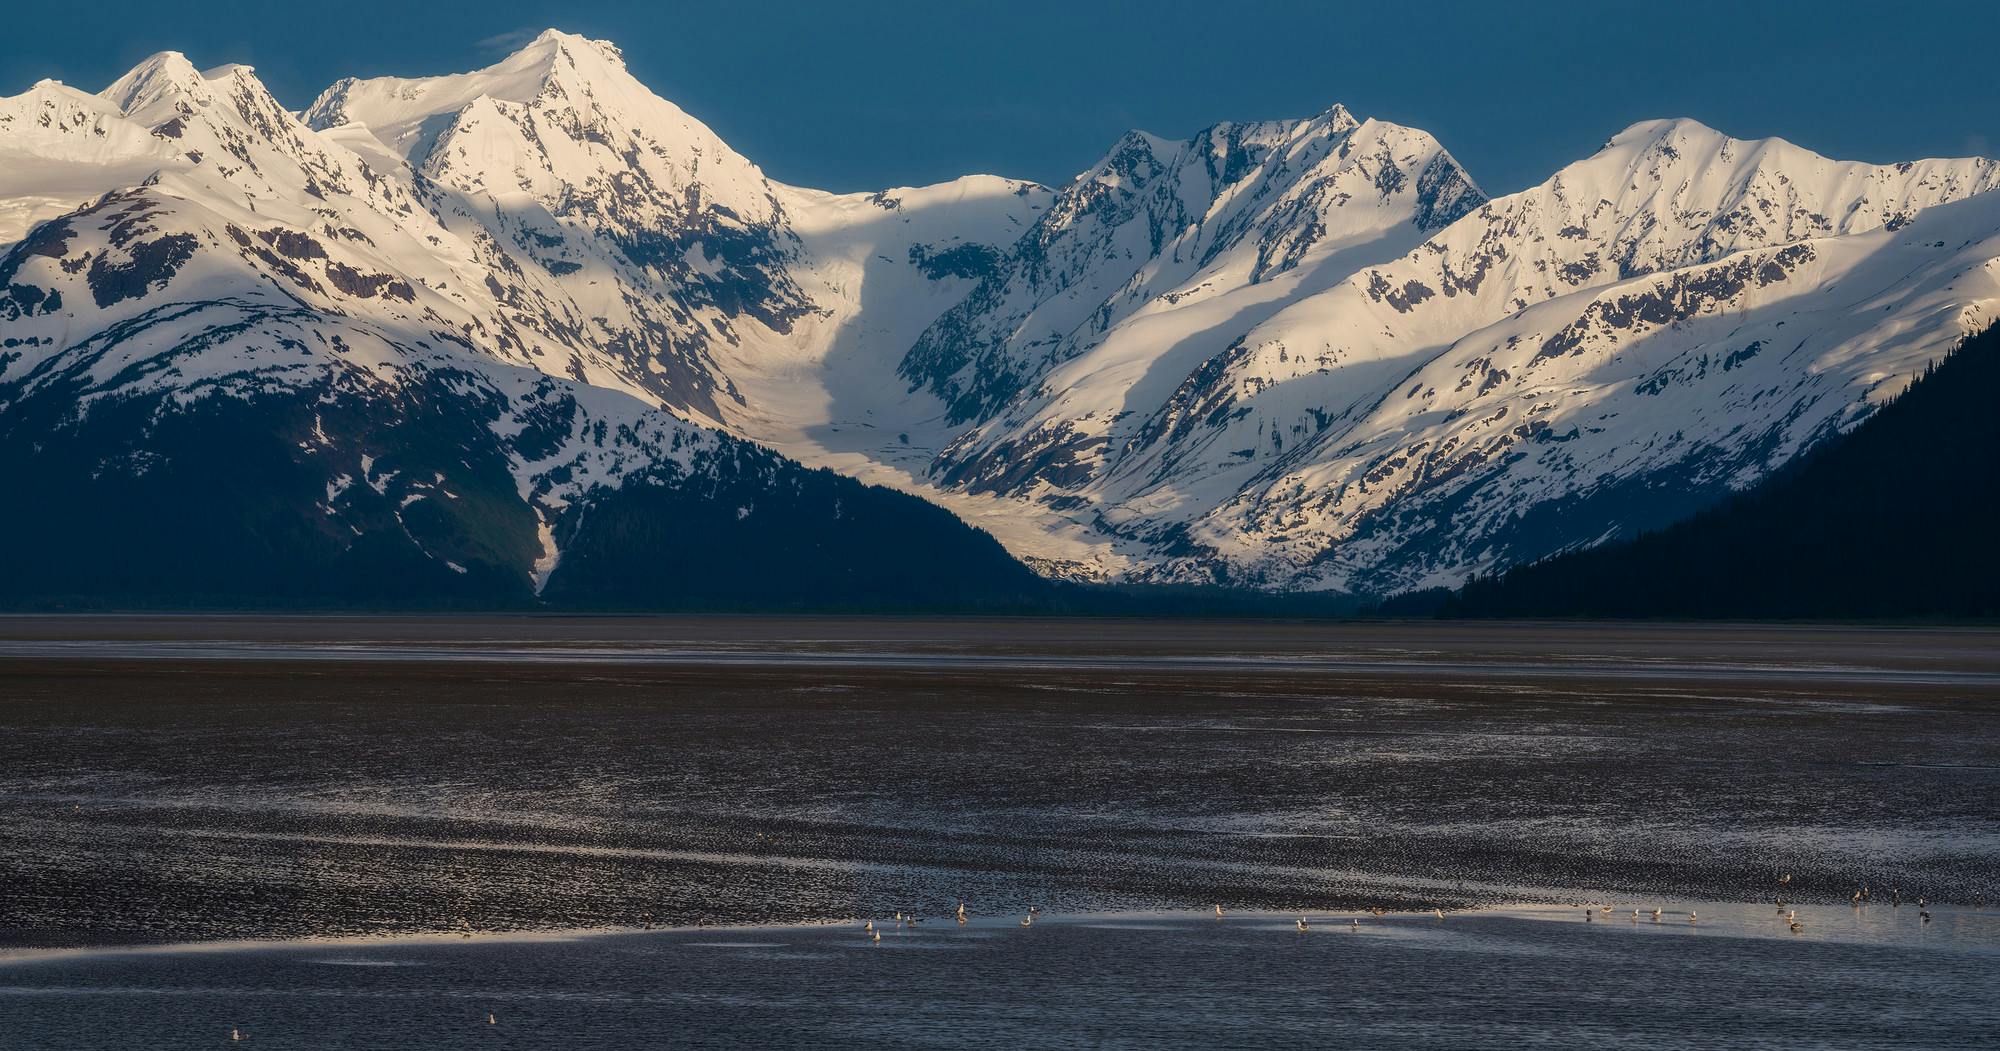 Low Tide on the Turnagain Arm